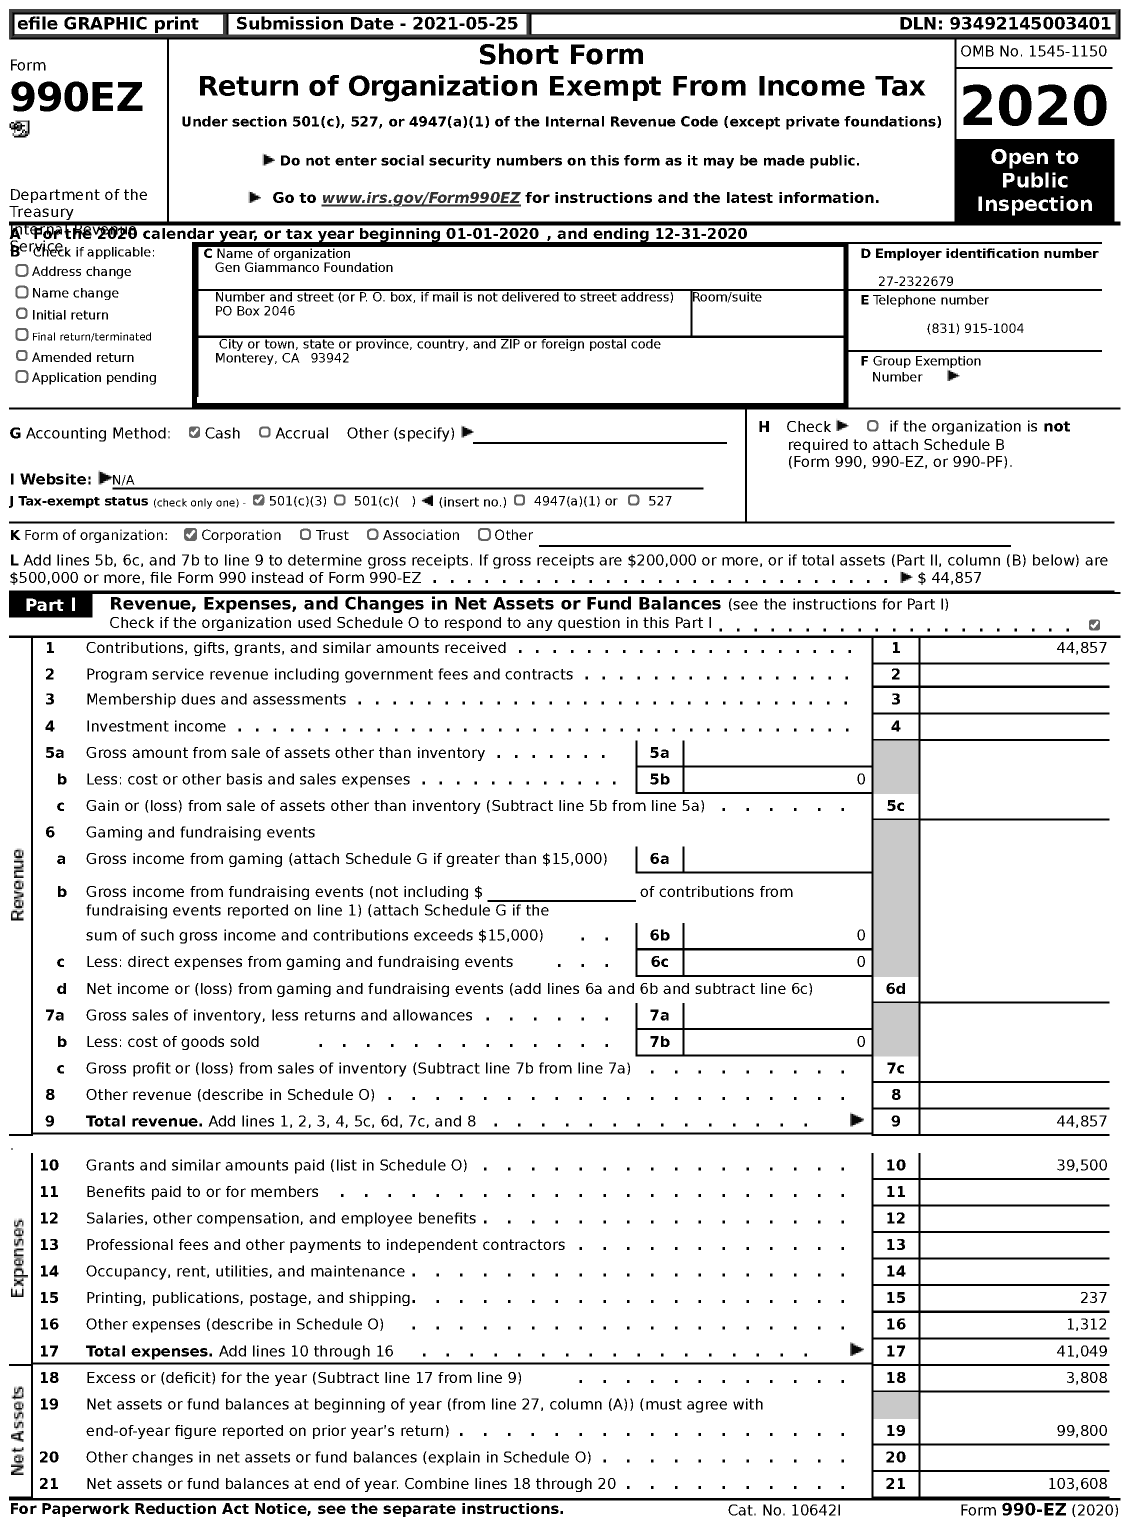 Image of first page of 2020 Form 990EZ for Gen Giammanco Foundation